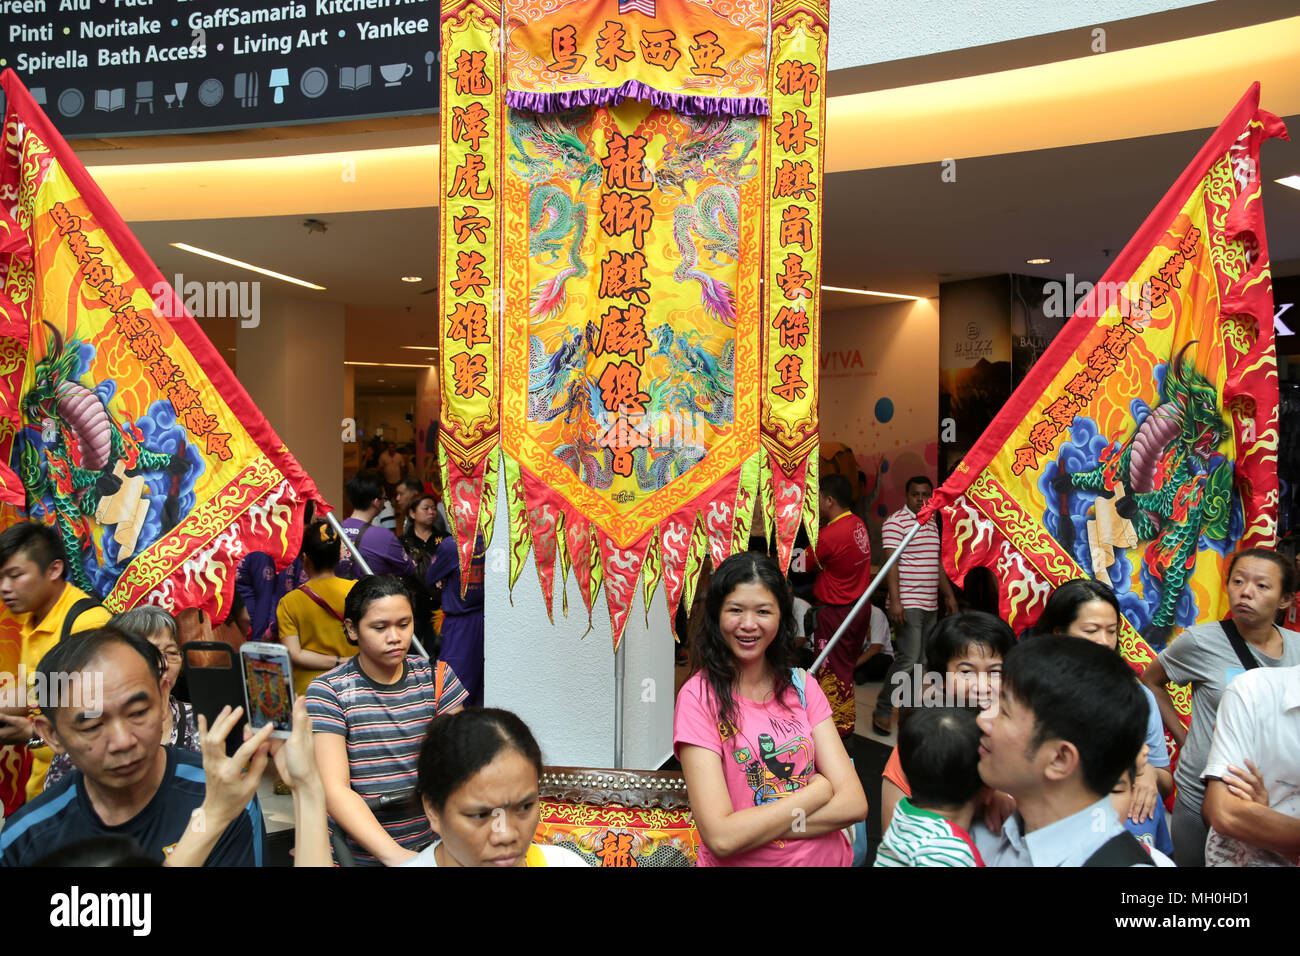 Banners of a lion dance group at VIVA HOME shopping mall in Kuala Lumpur, Malaysia. Stock Photo